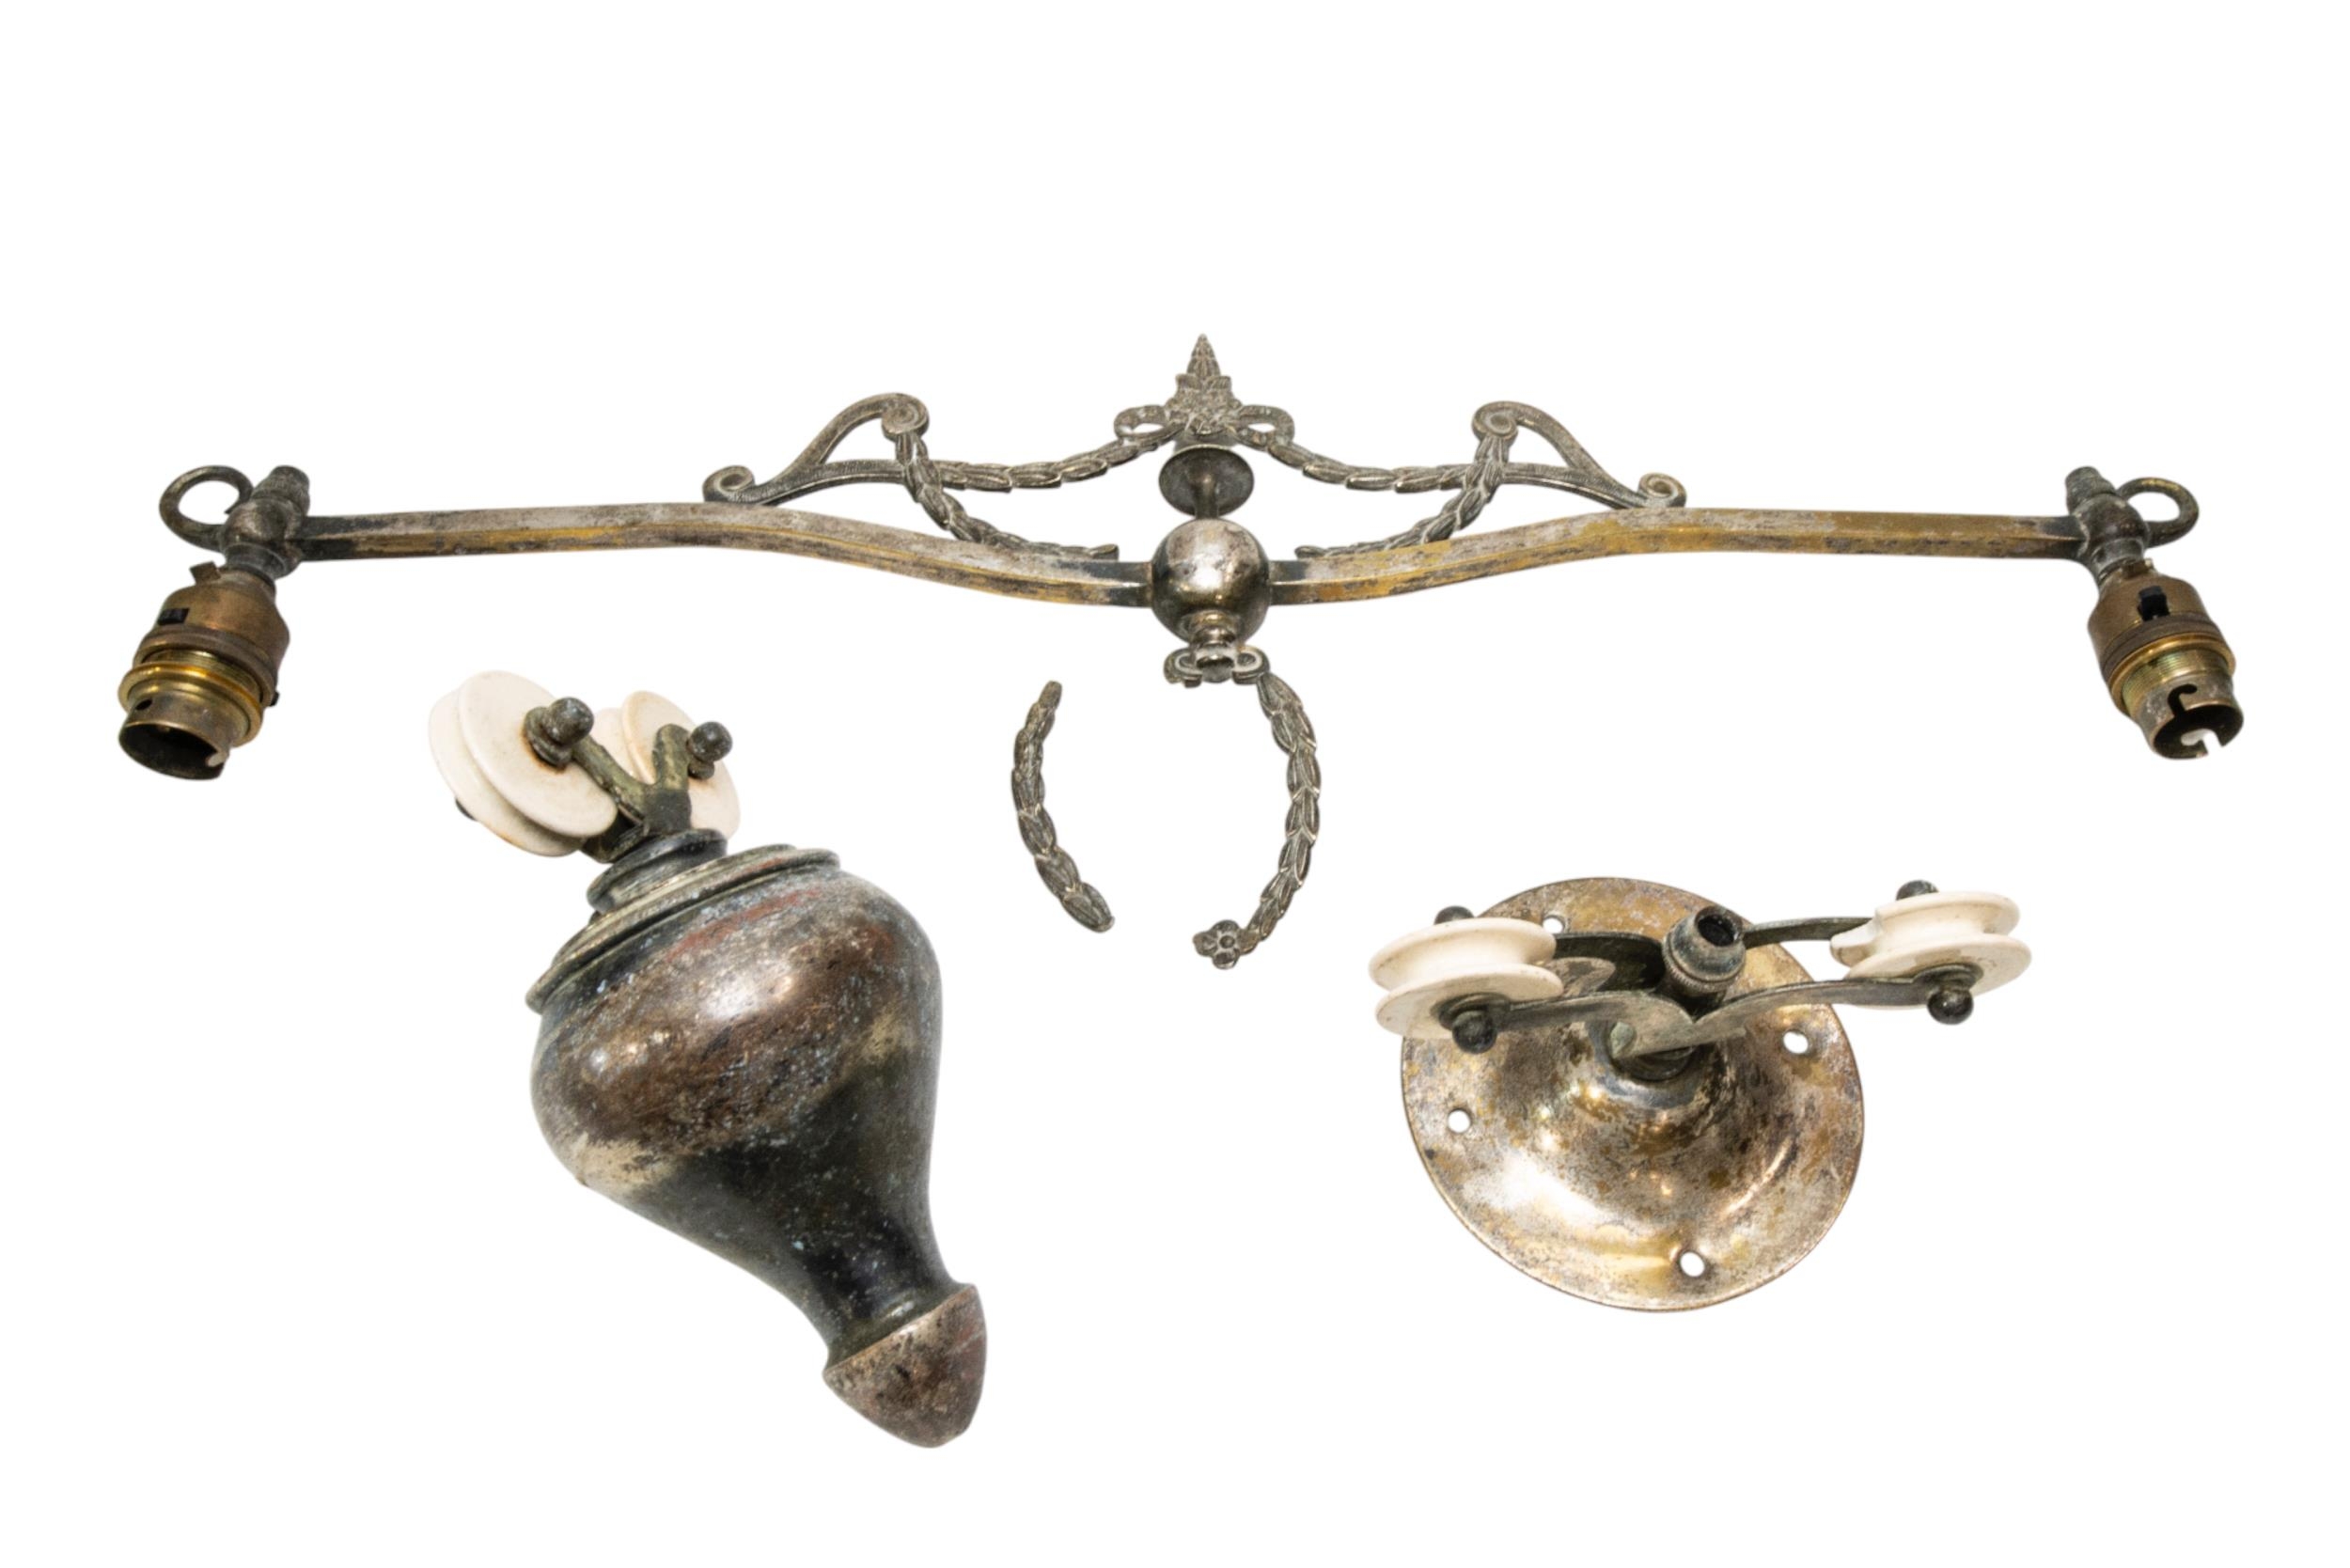 A NEOCLASSICAL COPPER ALLOY 'PLAFONNIER' LIGHT FITTING ORNATELY DECORATED WITH LIONS MASKS, an - Image 3 of 4